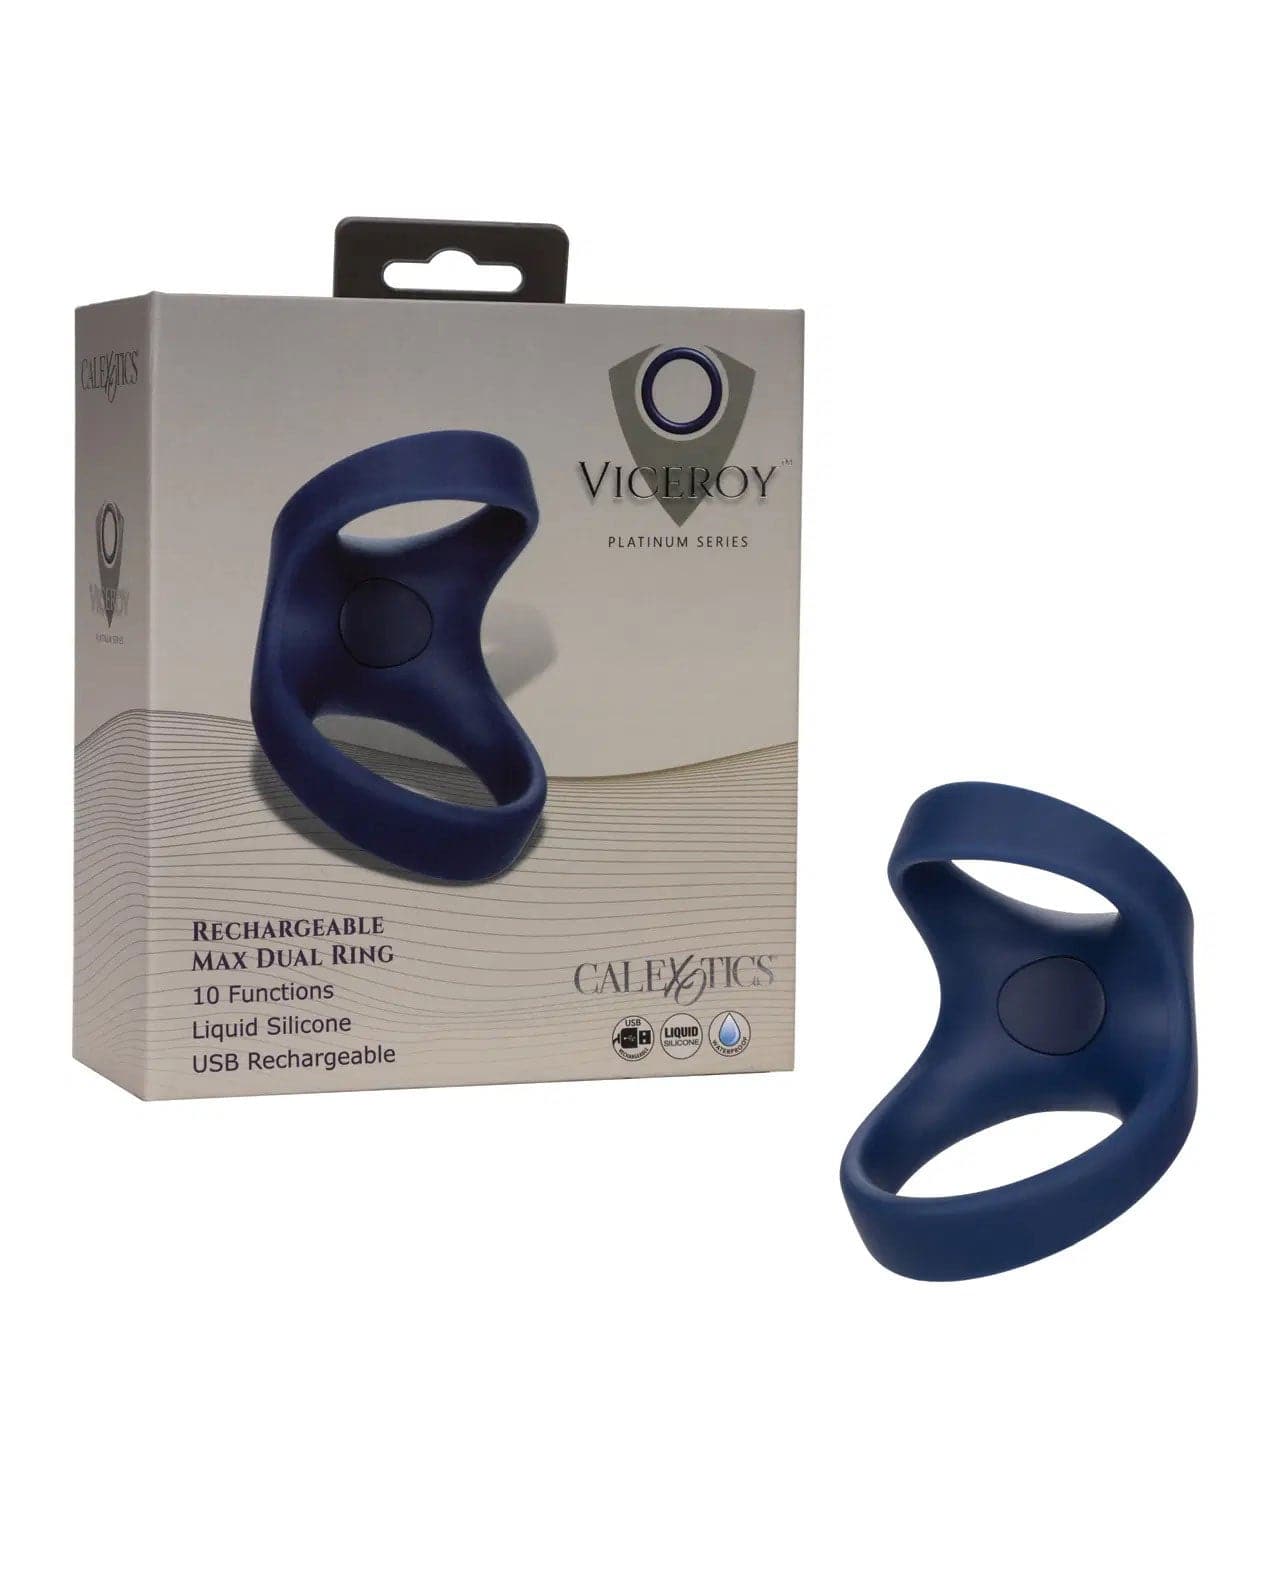 viceroy rechargeable max dual ring blue